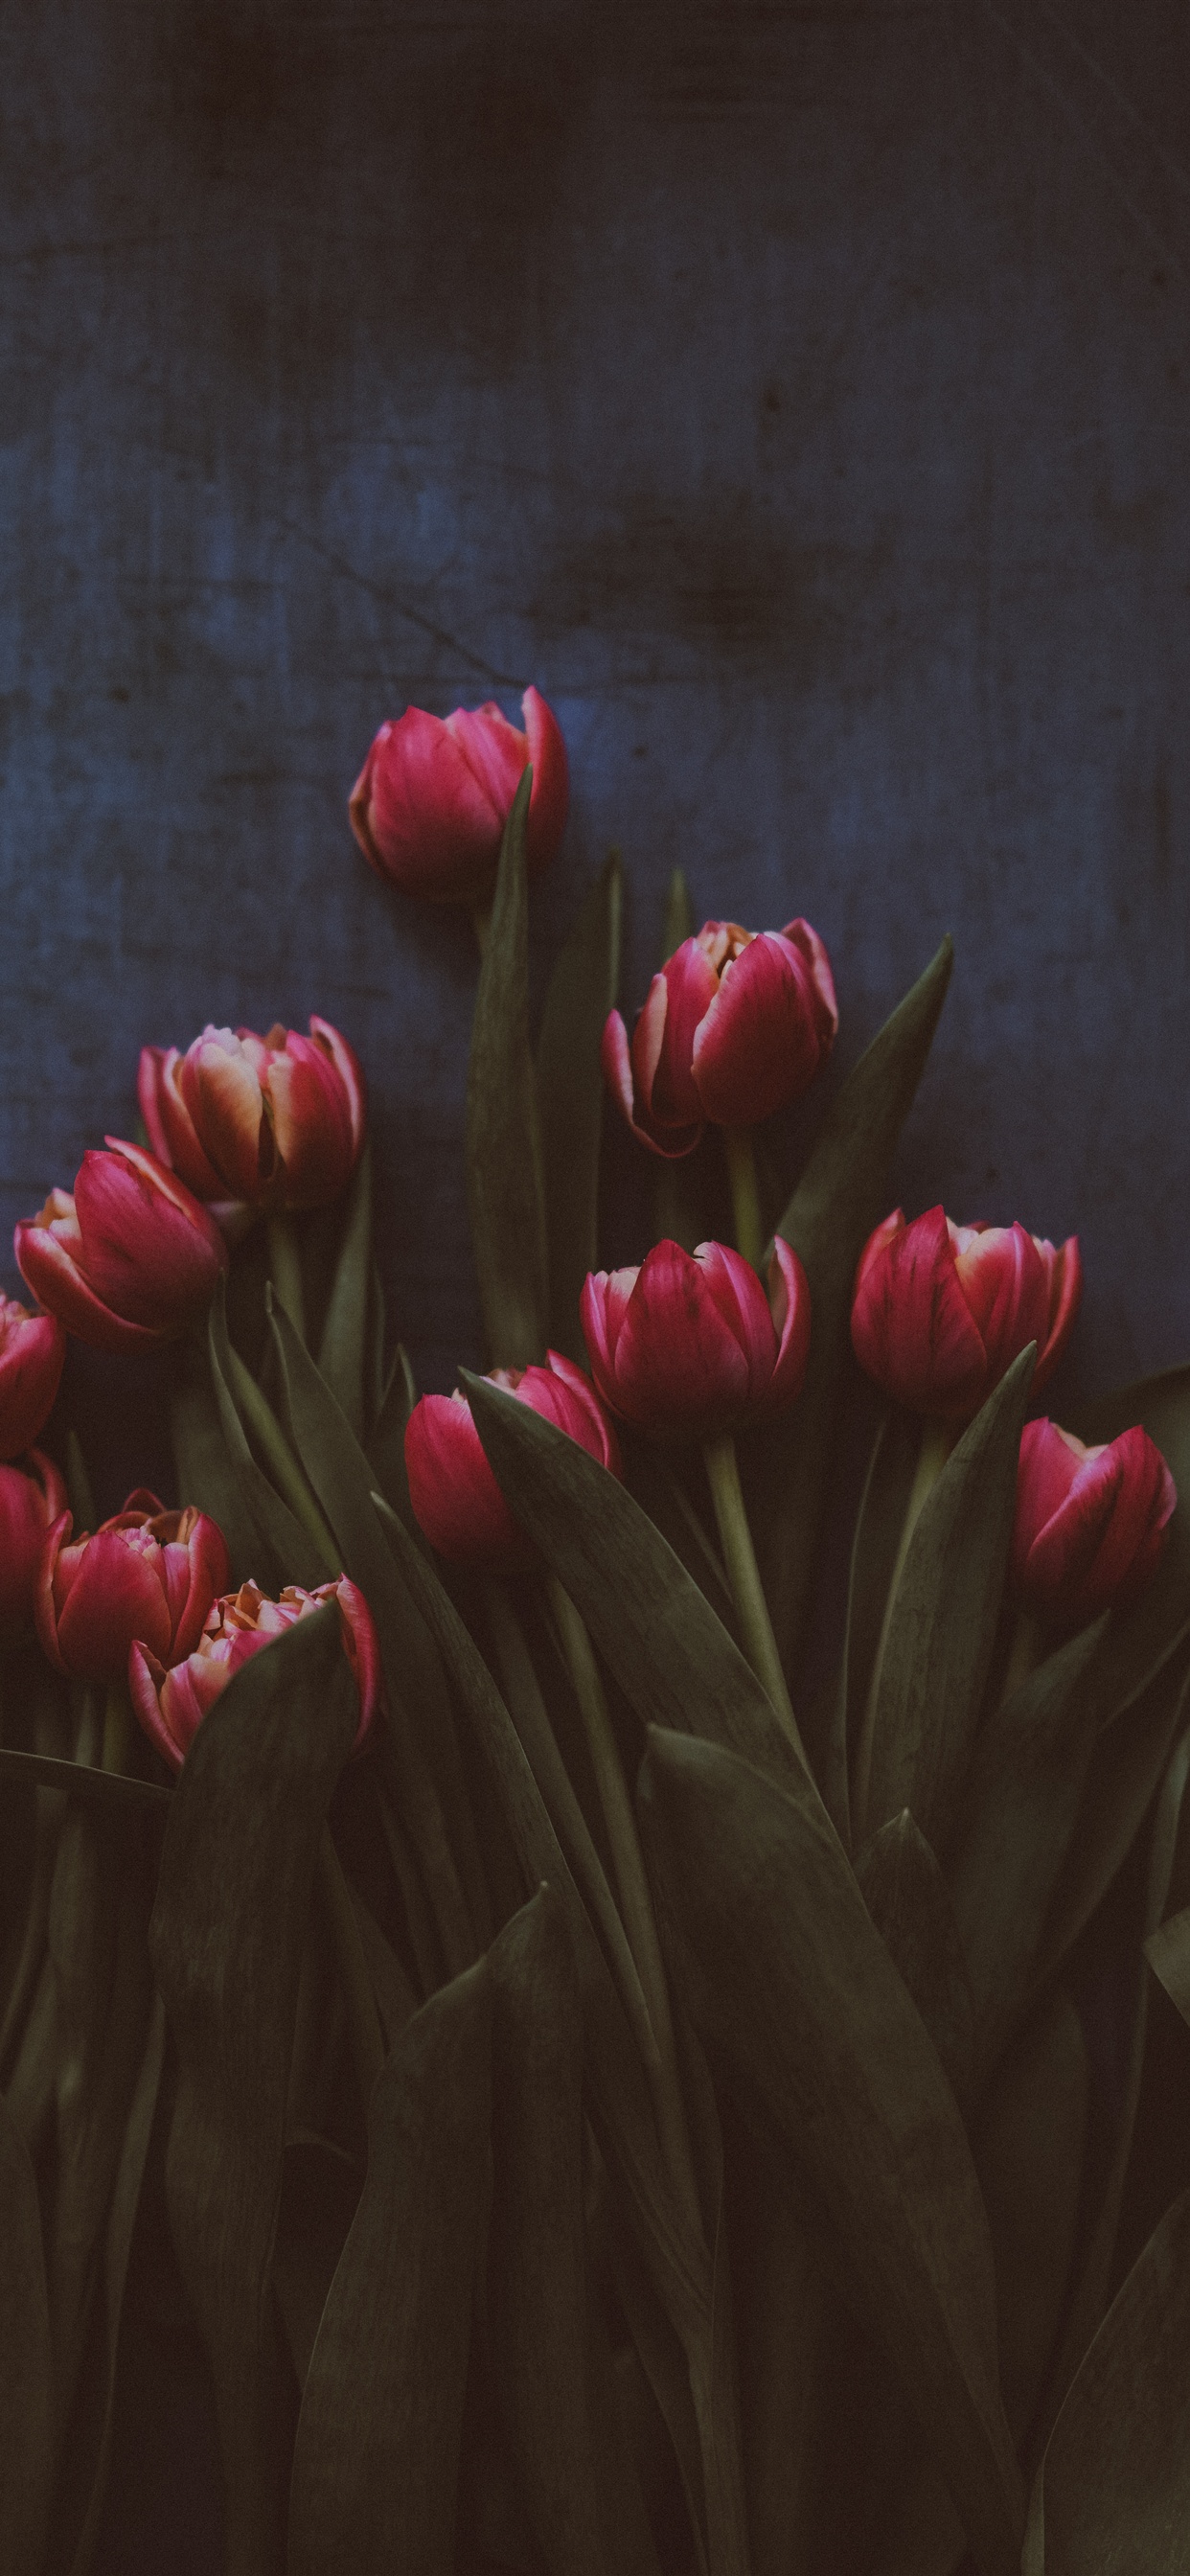 Red tulips, darkness iPhone XS Max, X 3GS wallpaper download